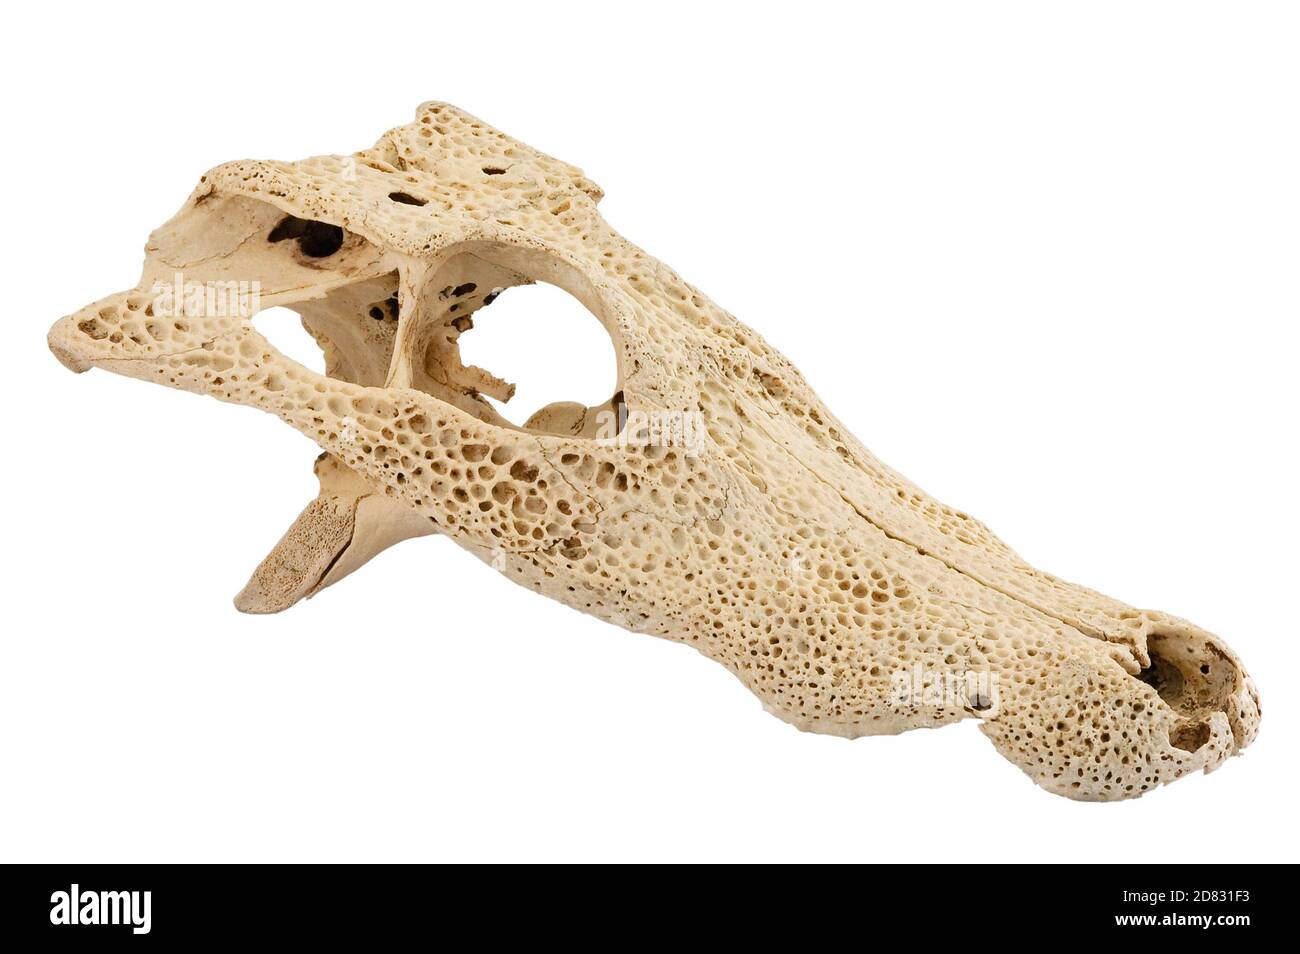 Skull of yacare caiman from Brazilian Pantanal, species indigenous of South America, isolated on white background, Brazil Stock Photo